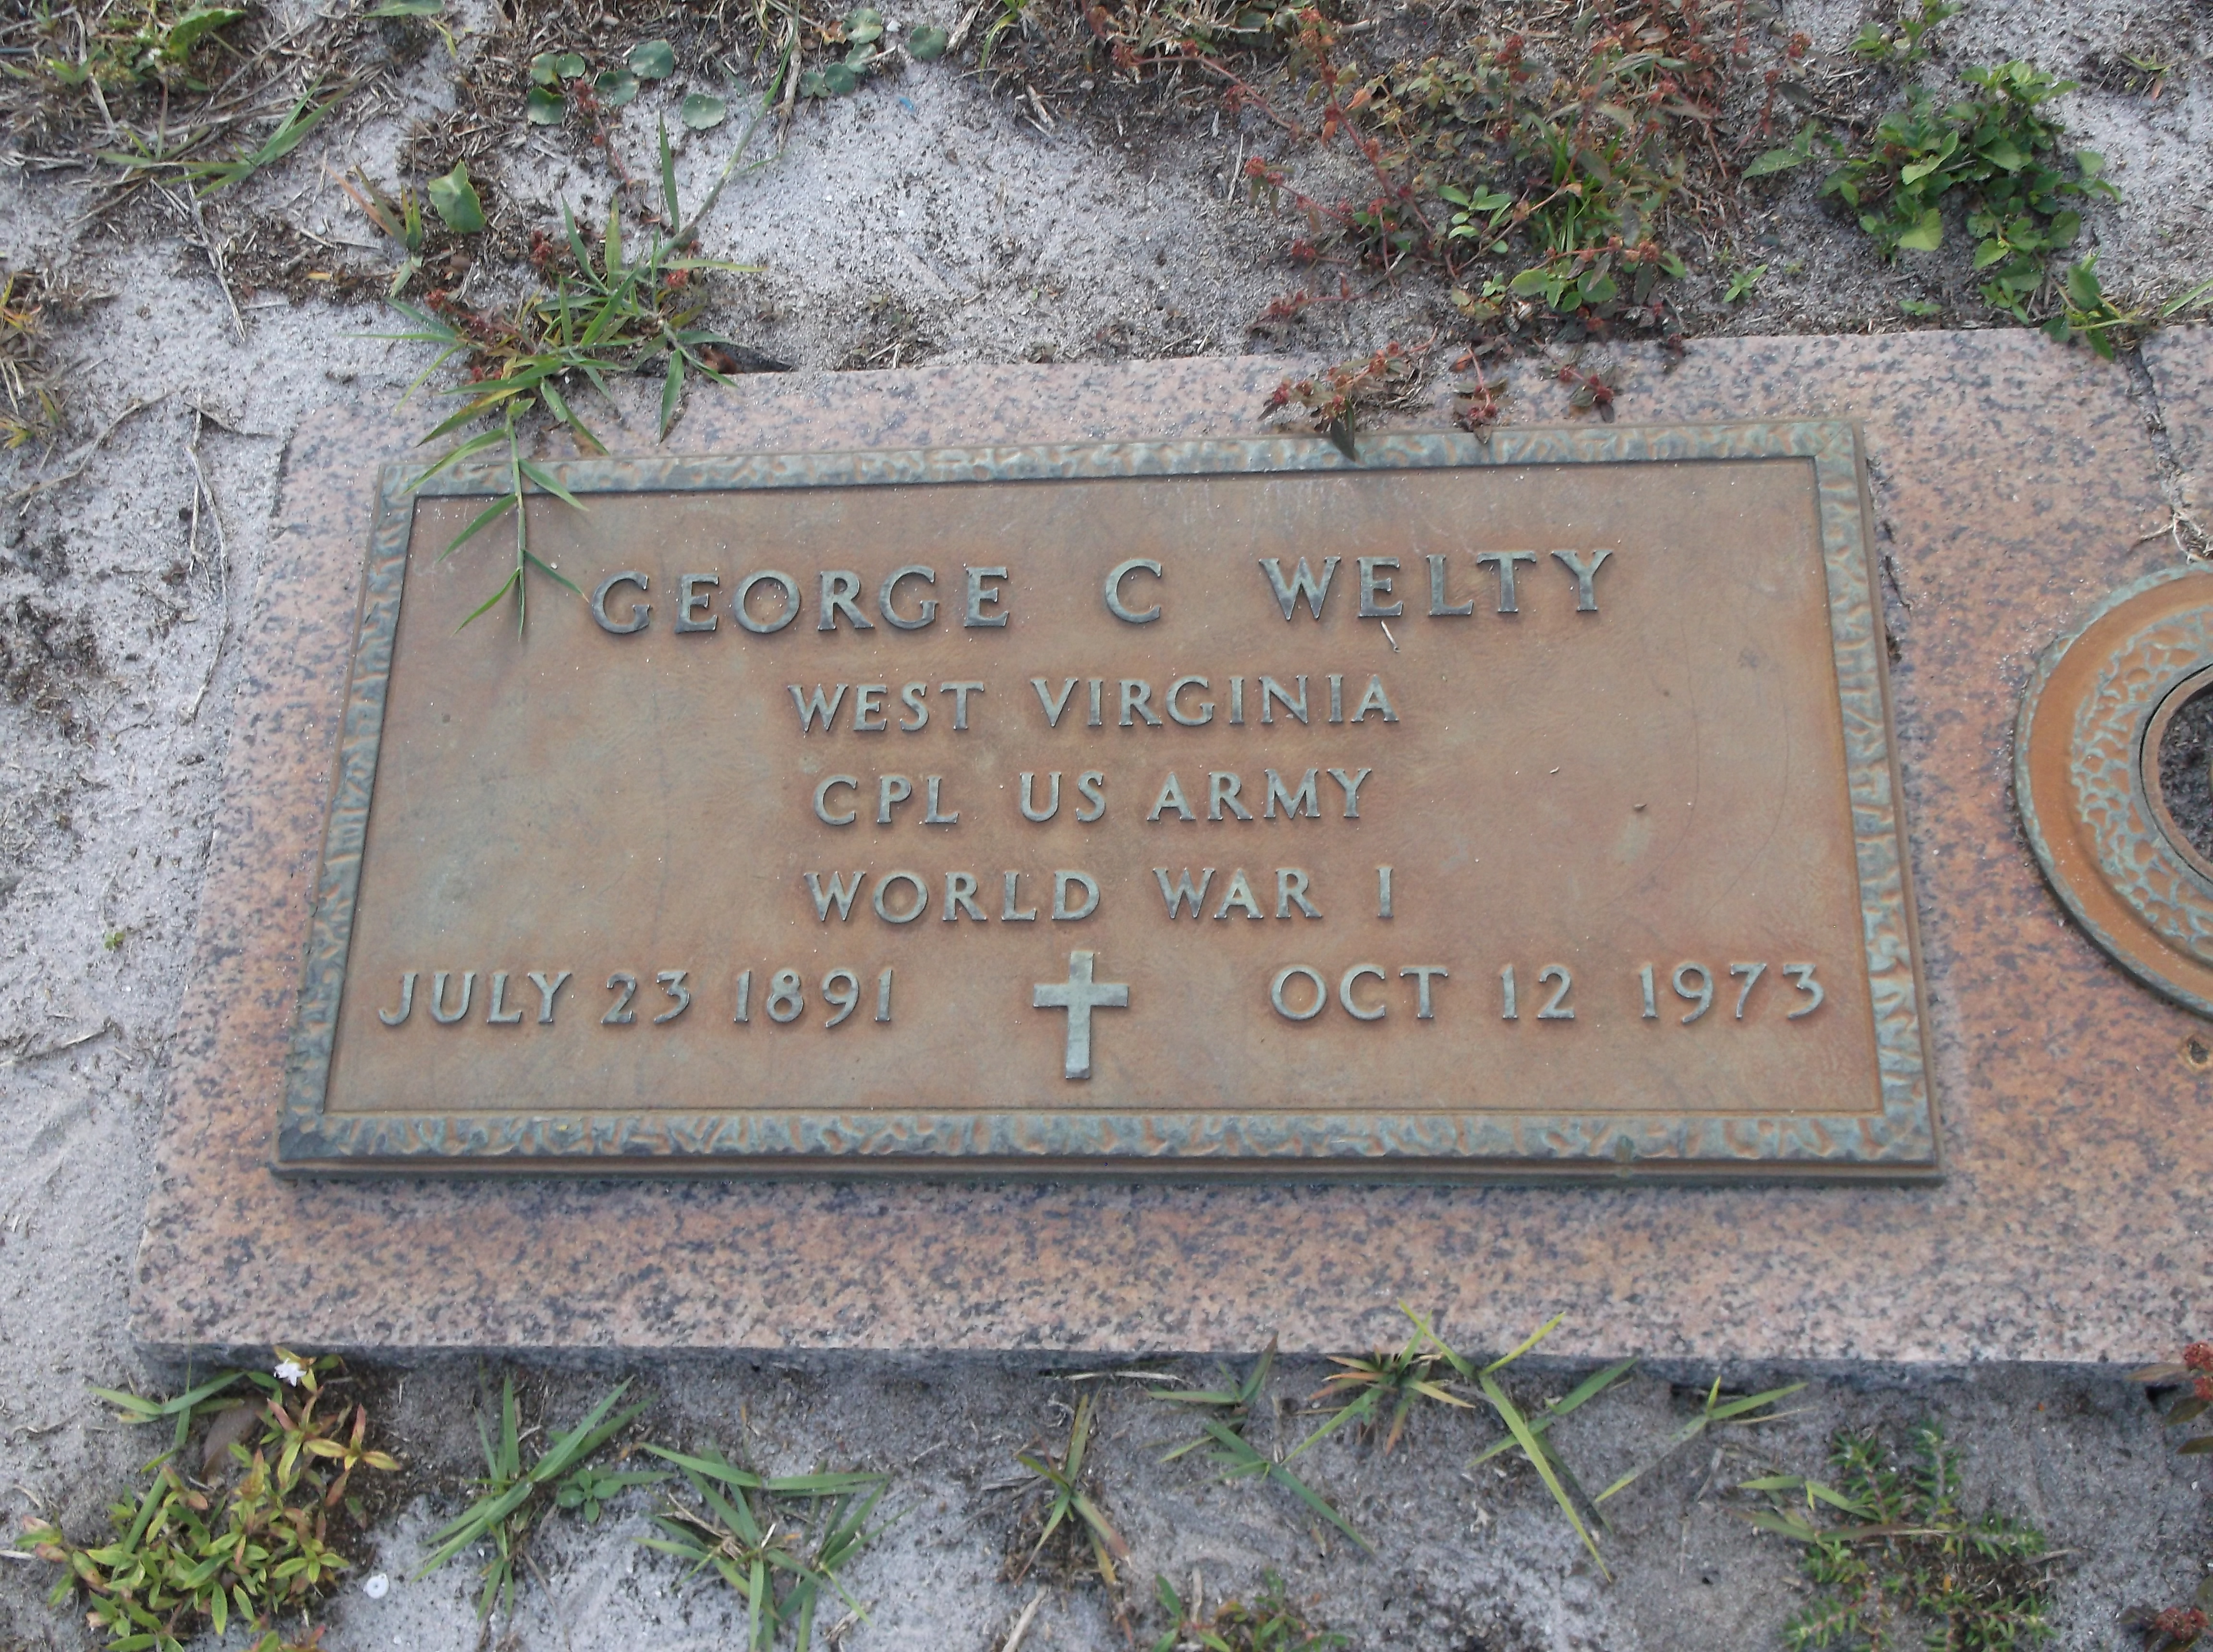 George C Welty